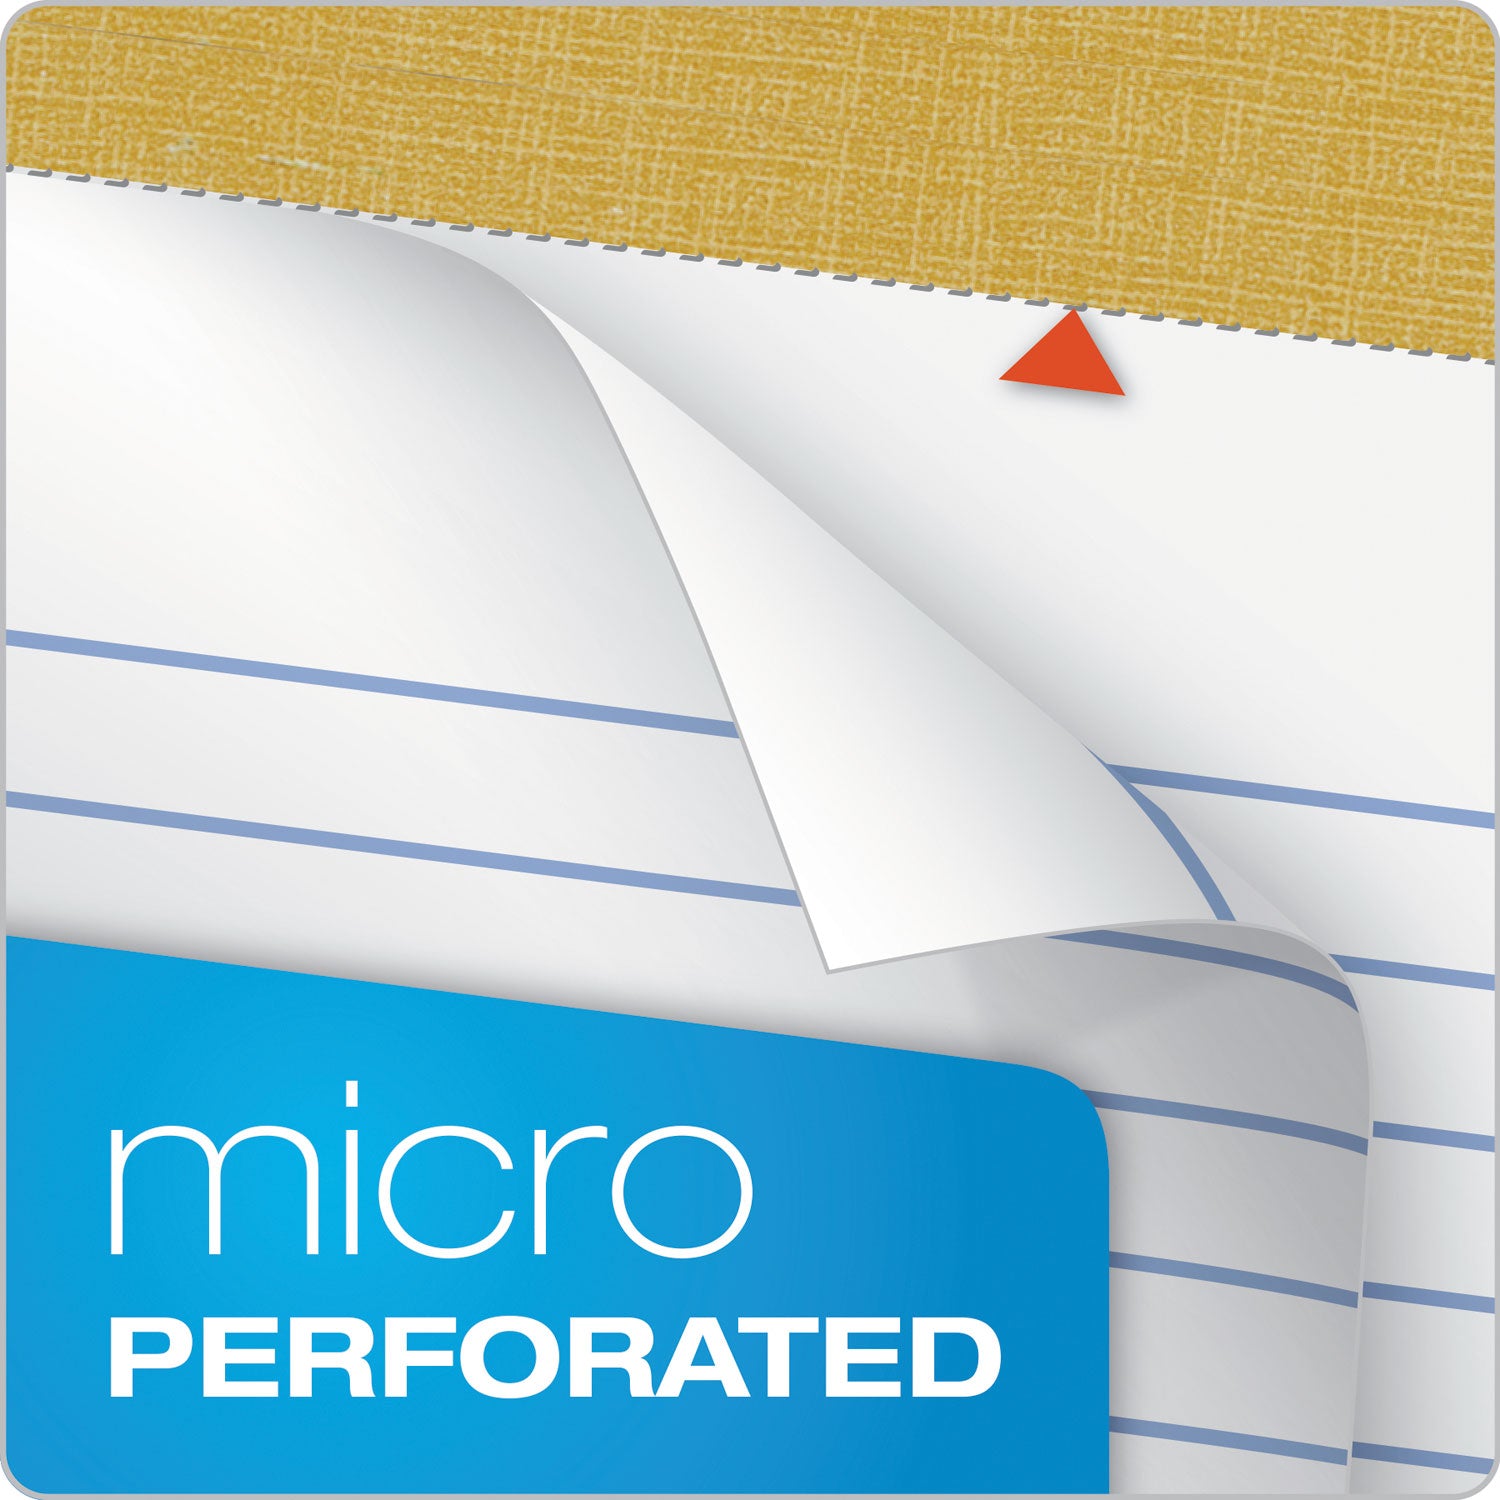 The Legal Pad" Plus Ruled Perforated Pads with 40 pt. Back, Narrow Rule, 50 White 5 x 8 Sheets, Dozen - 